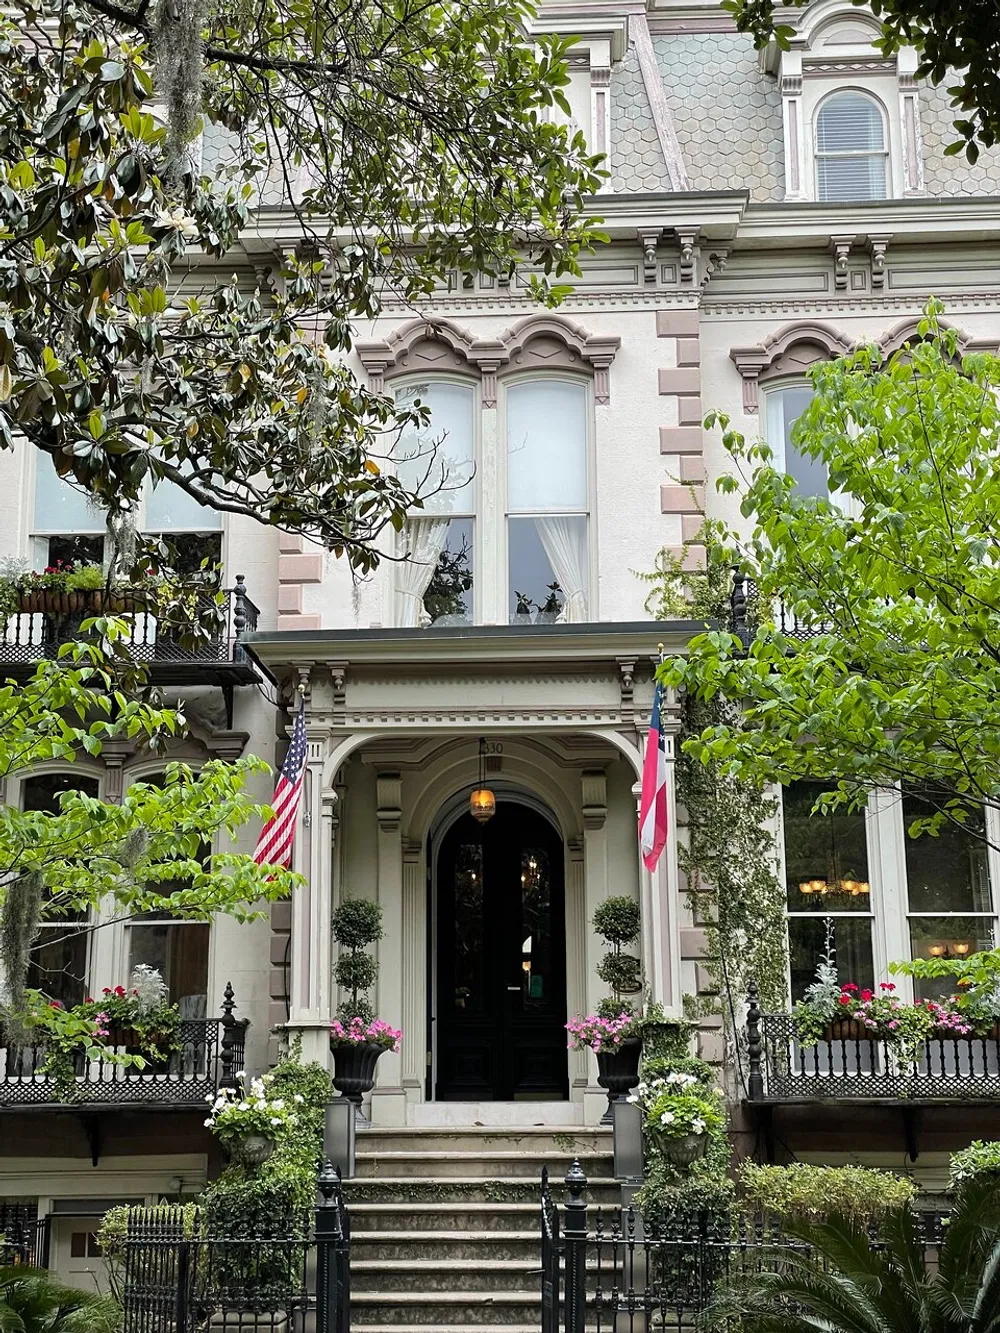 This image shows the facade of an elegant Victorian-style house with an ornate entryway draped with American flags and adorned with flowering planters